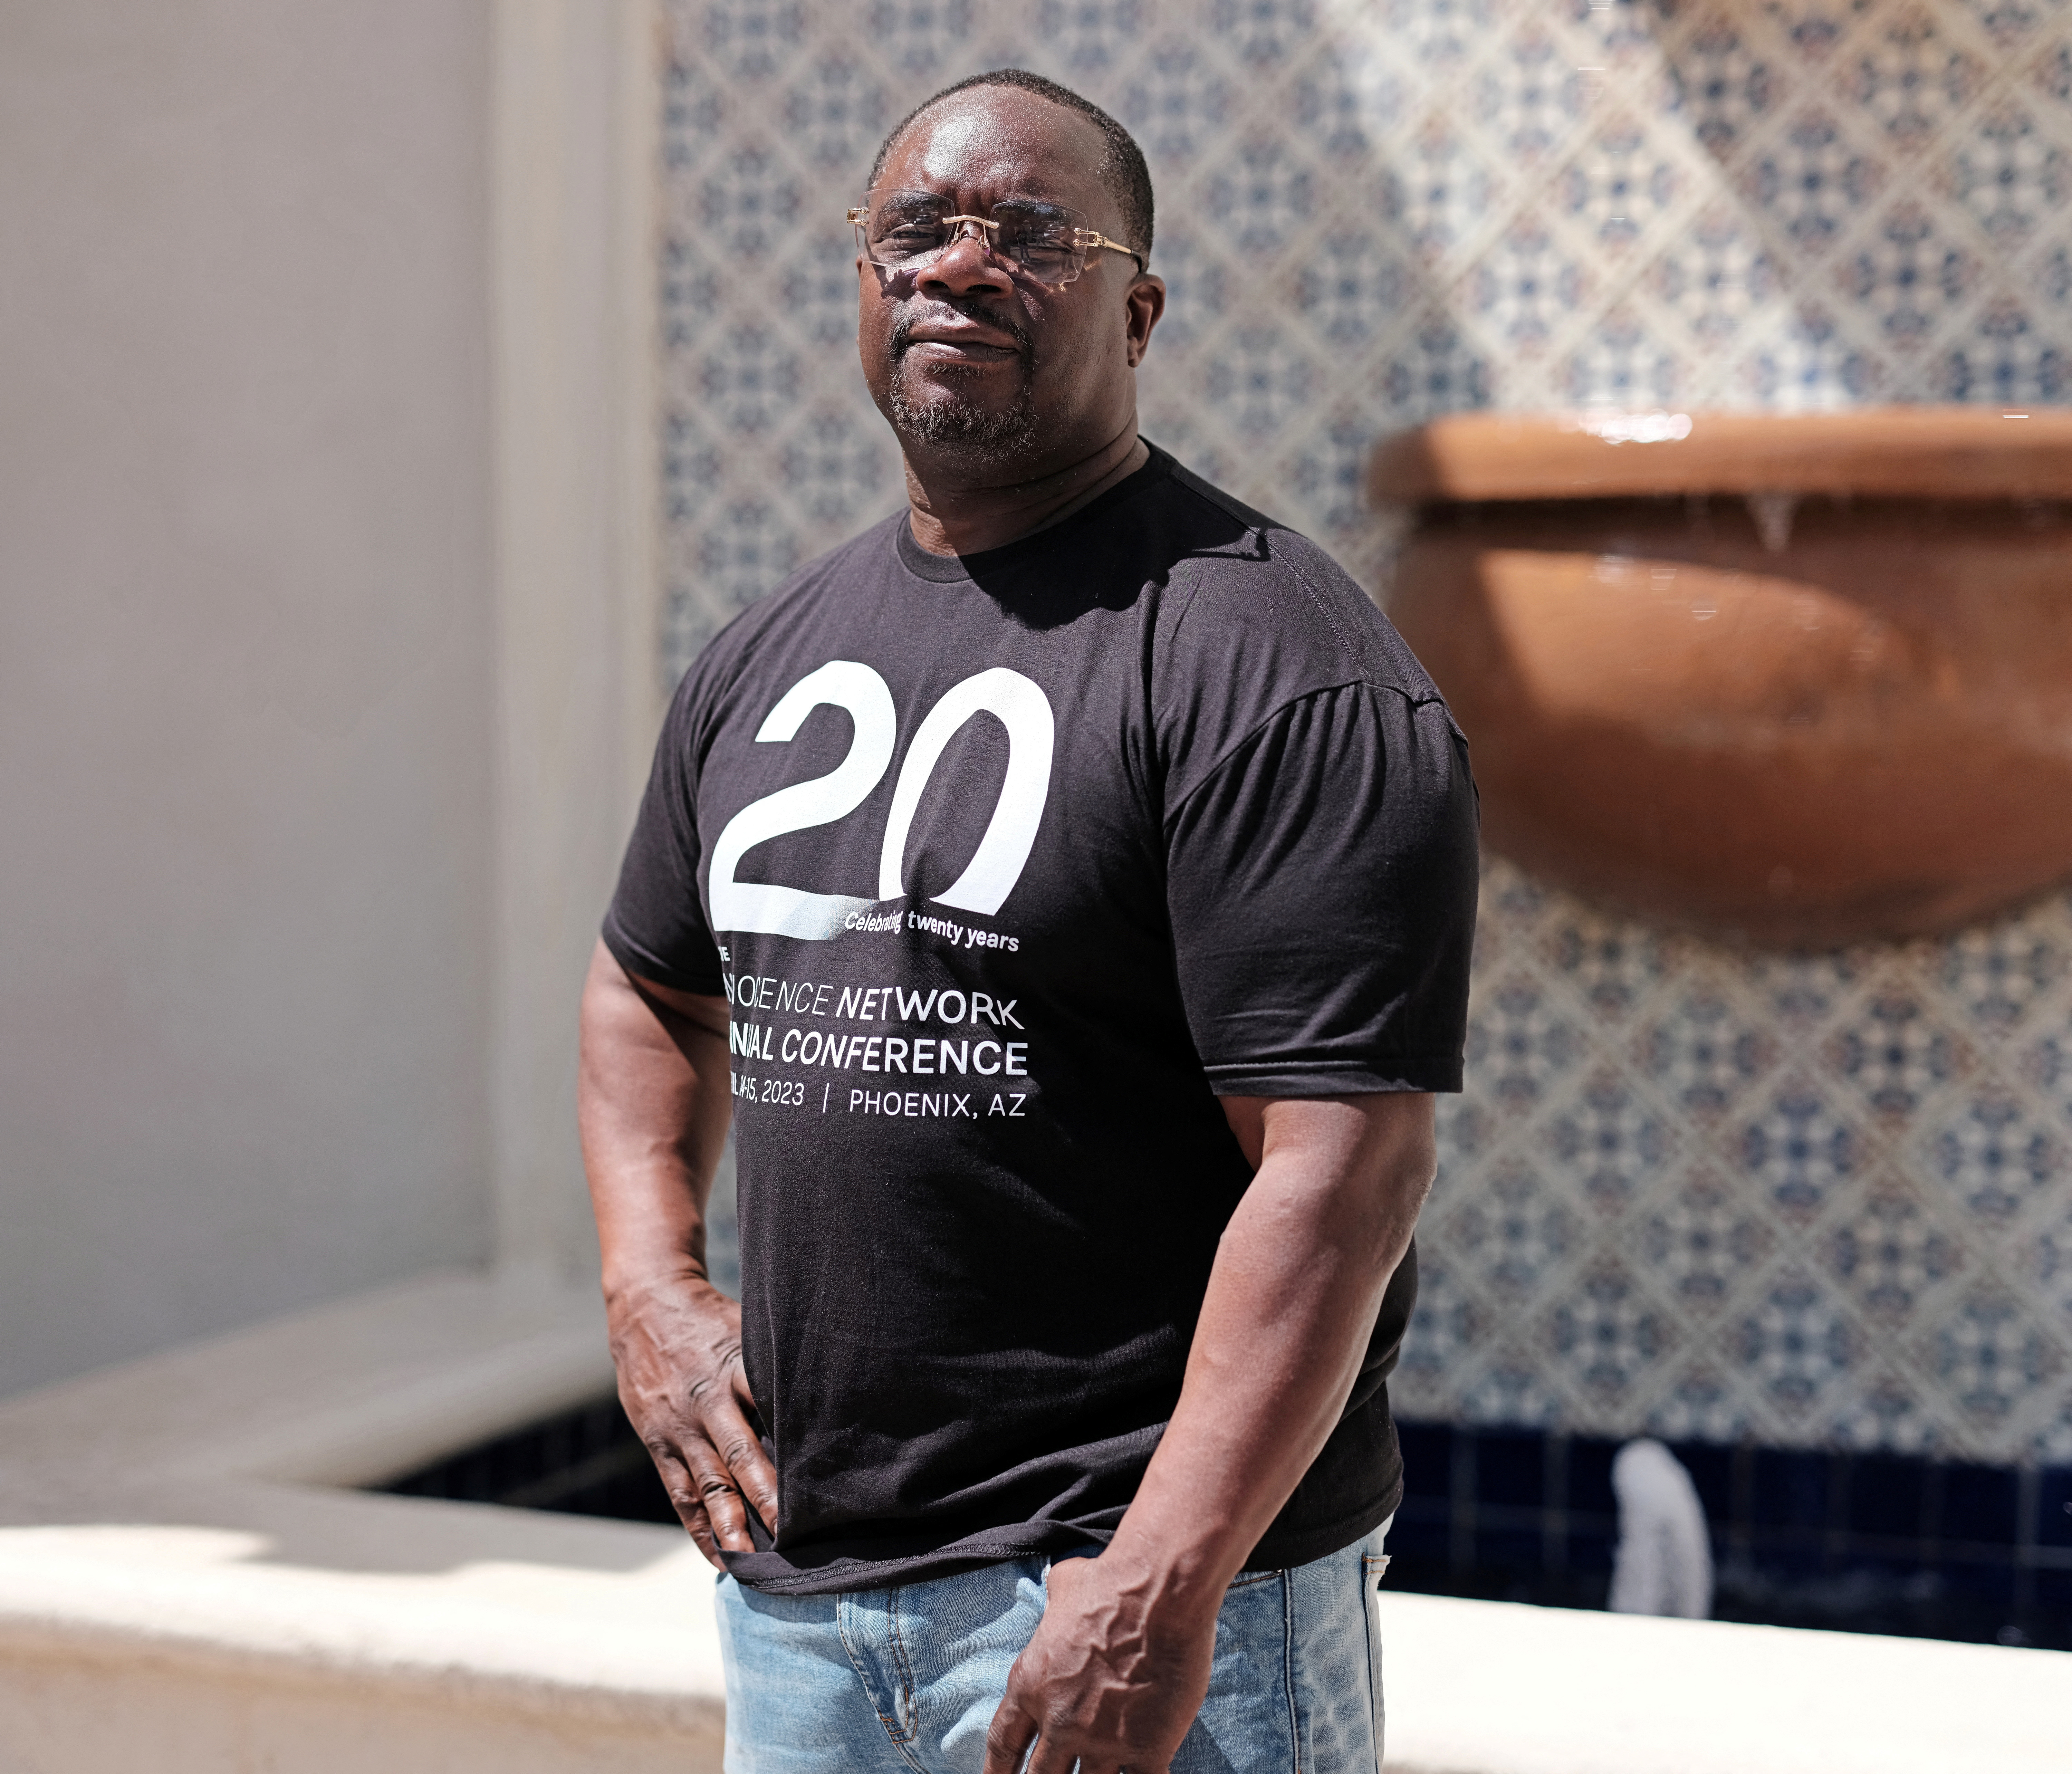 Rodney Roberts, who pleaded guilty to kidnapping for a crime he did not commit and was exonerated by DNA evidence, stands in Phoenix